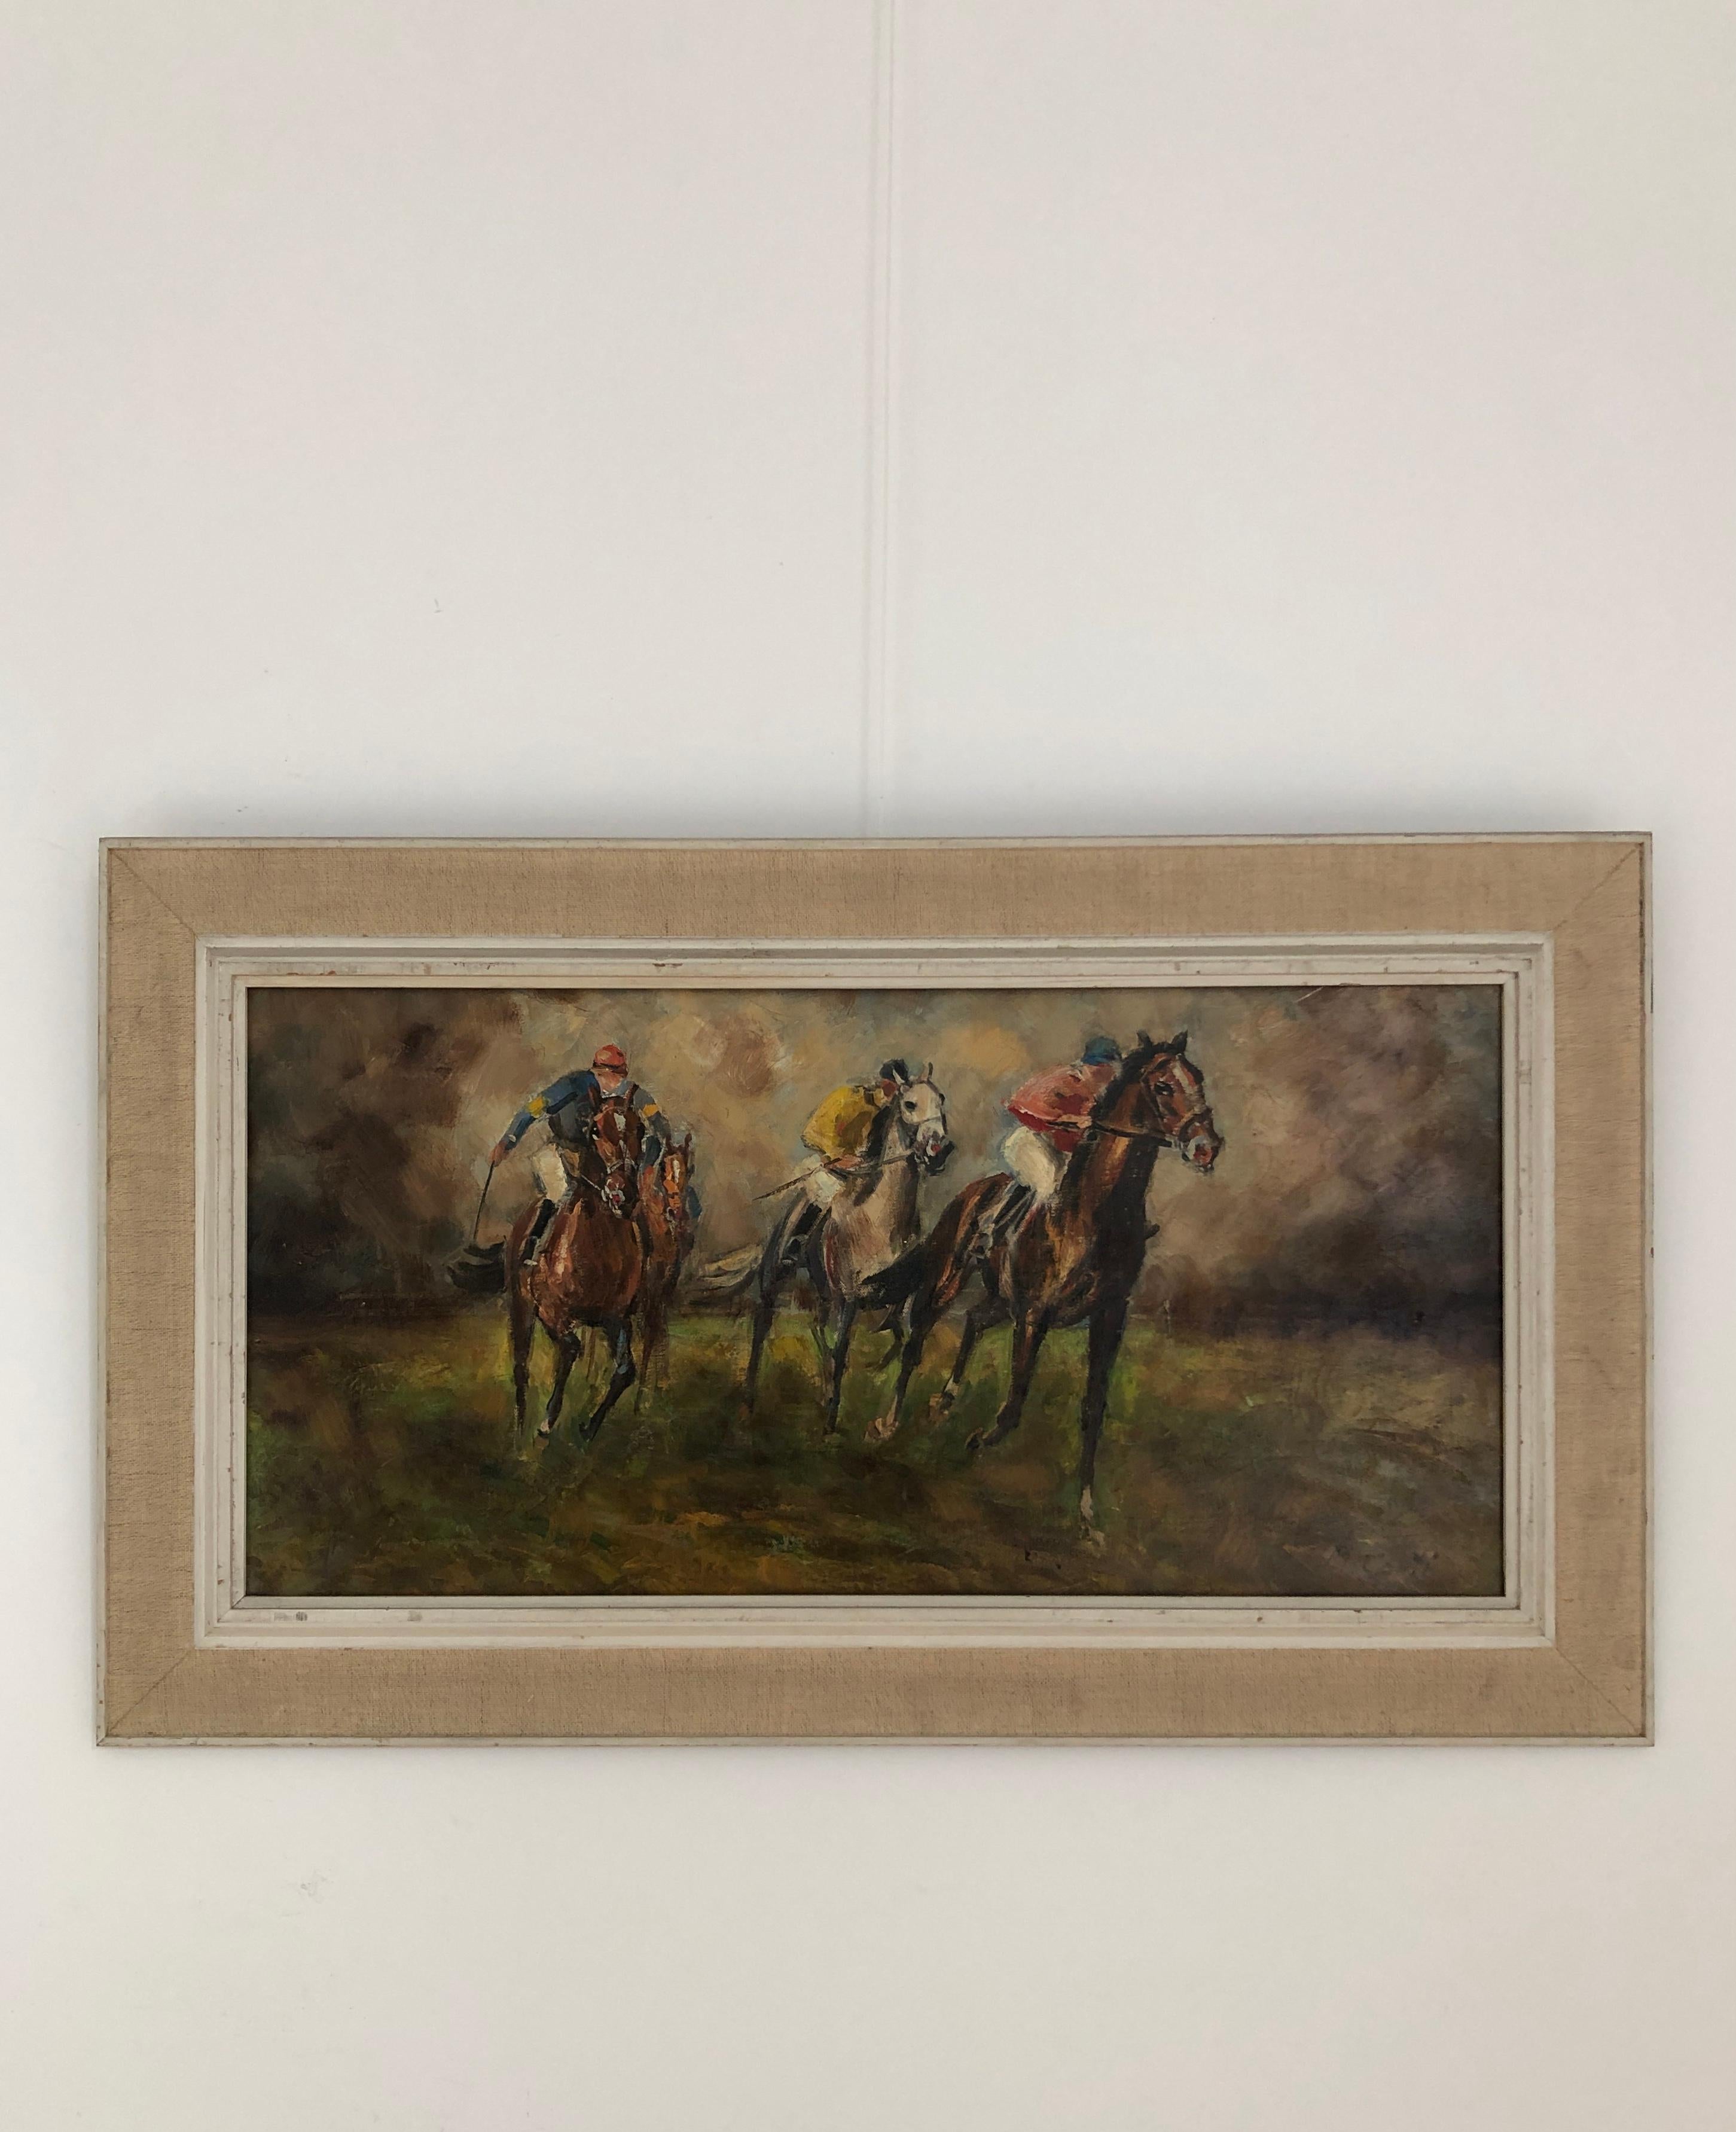 Polo game - Painting by M. Coryi